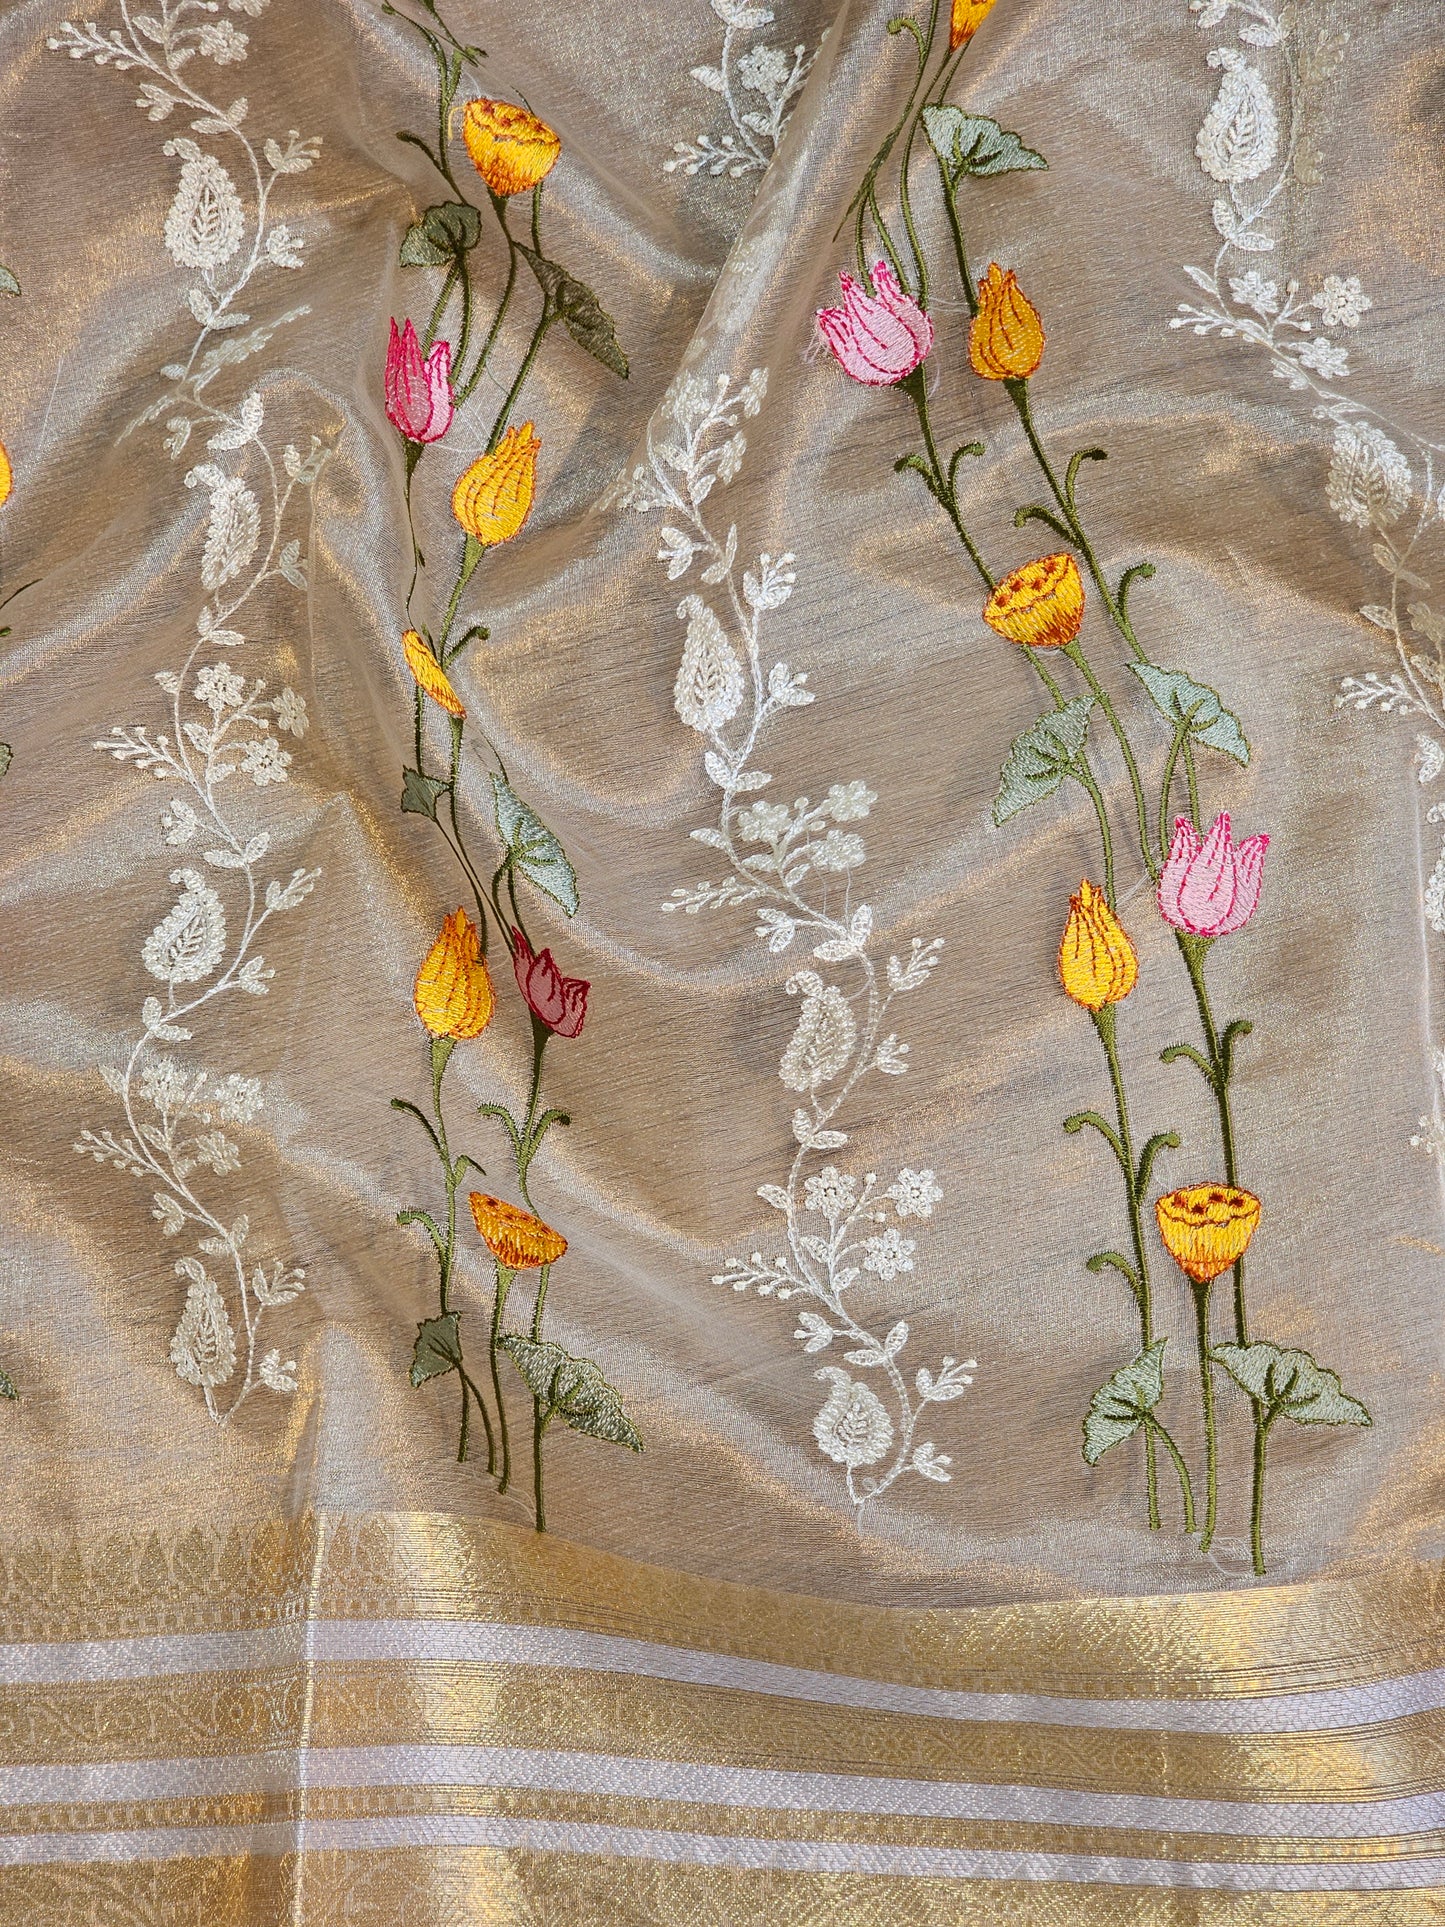 Pure Tissue Silk Pichwai Latar Embroidery Saree & Katan Border with special tassels and sleeves in blouse